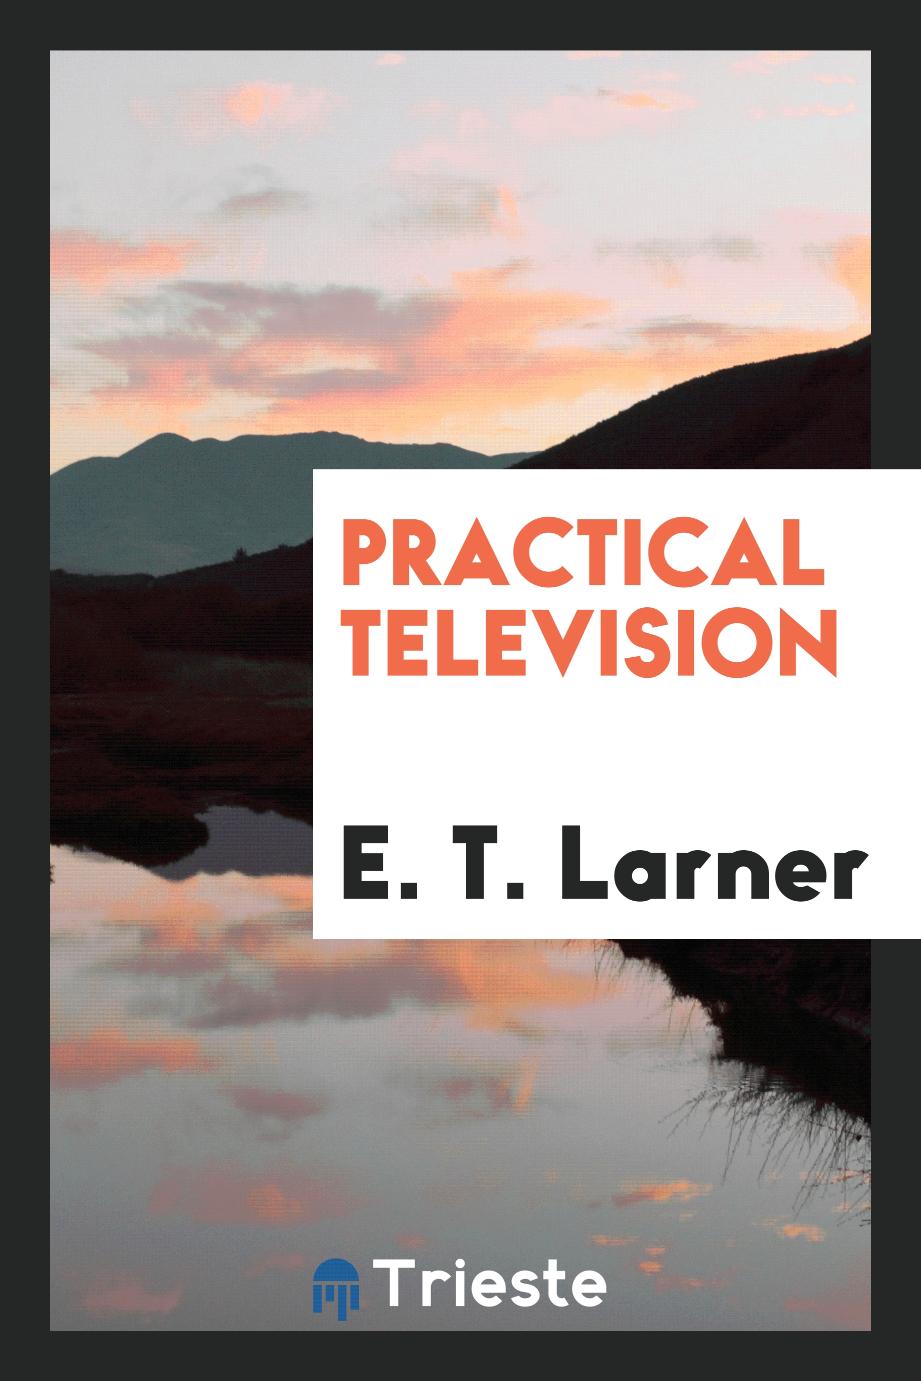 Practical television